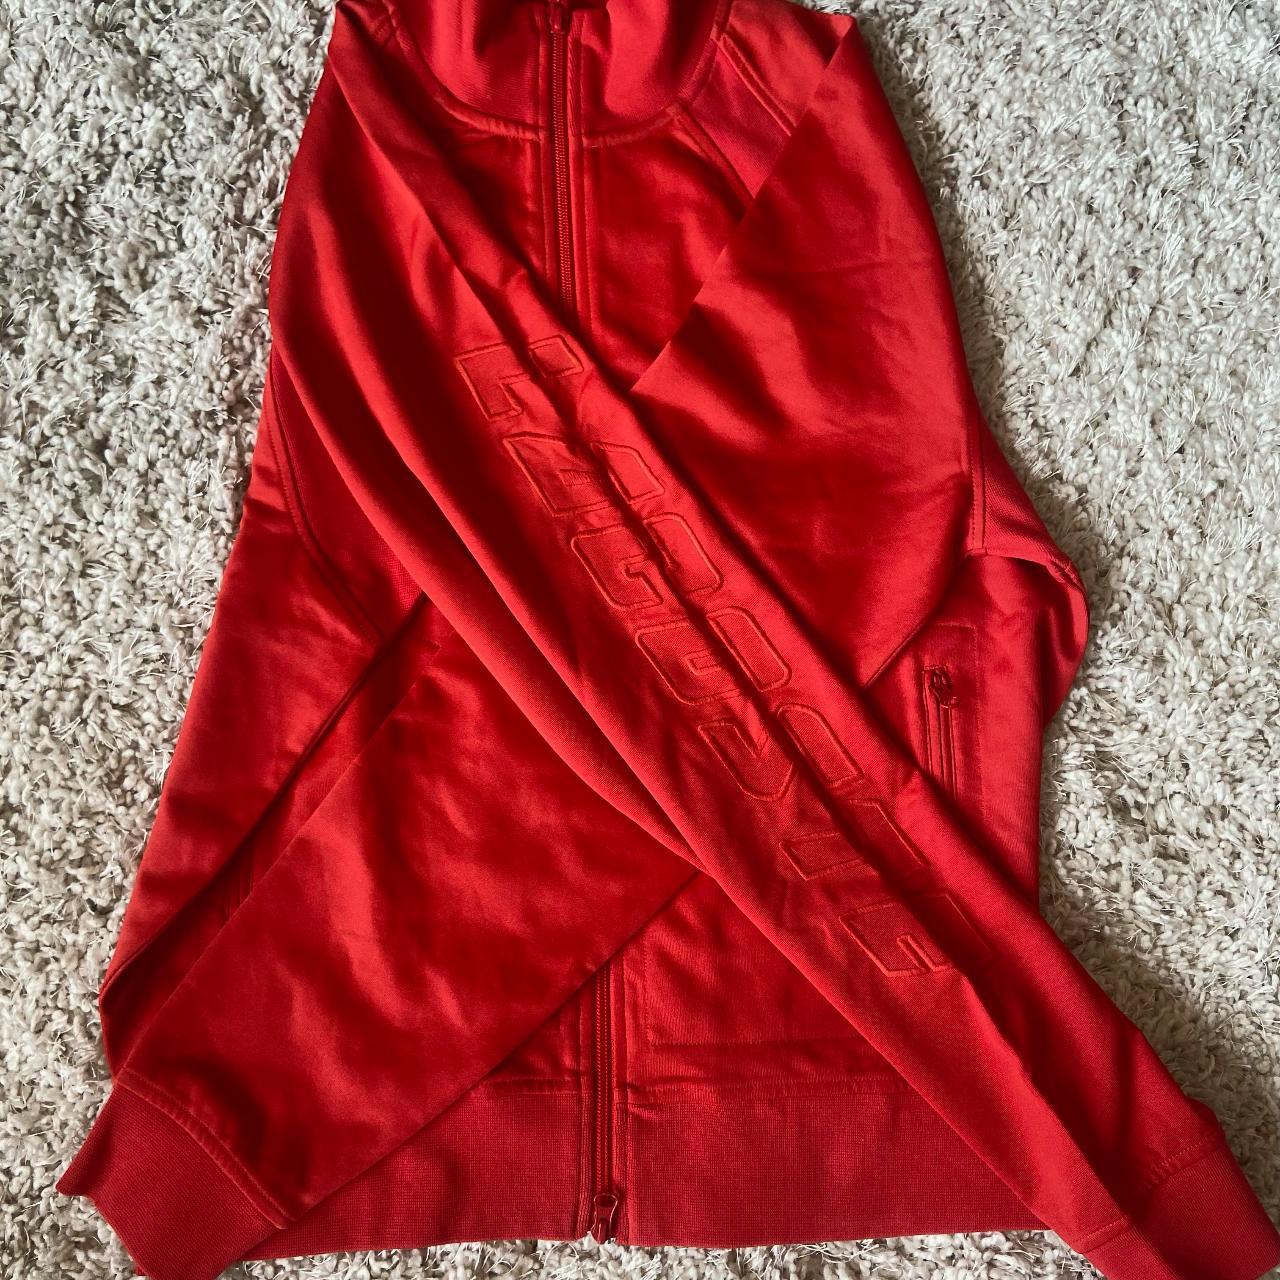 Lacoste Live Women's Red Jacket (5)